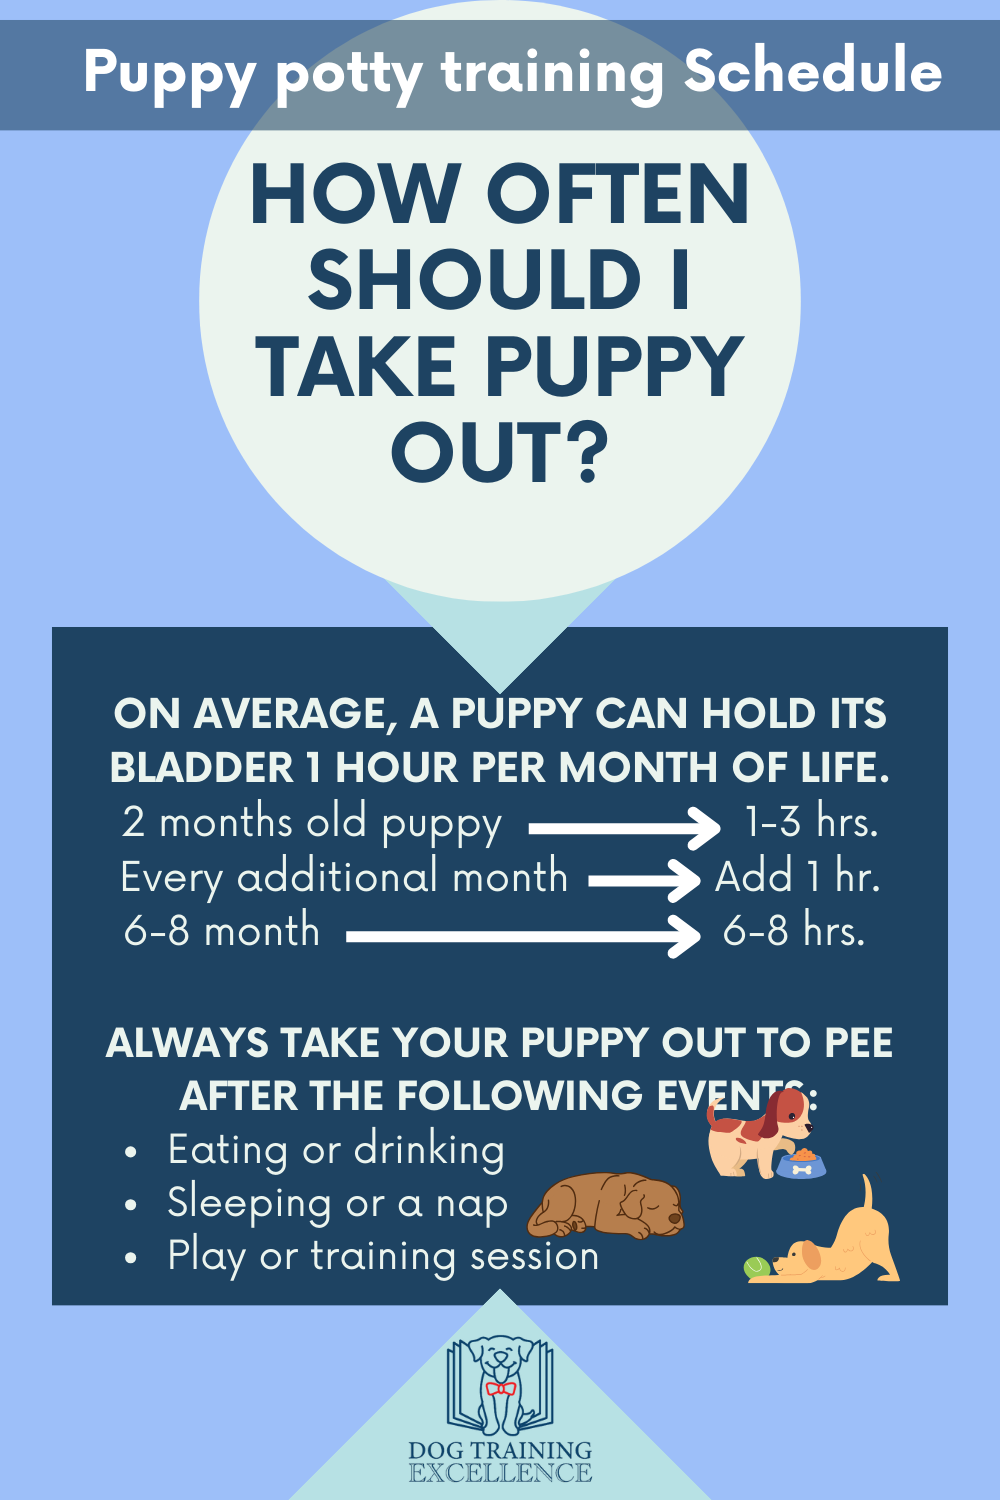 when to take puppy out, puppy potty training schedule, how often does a puppy need to pee